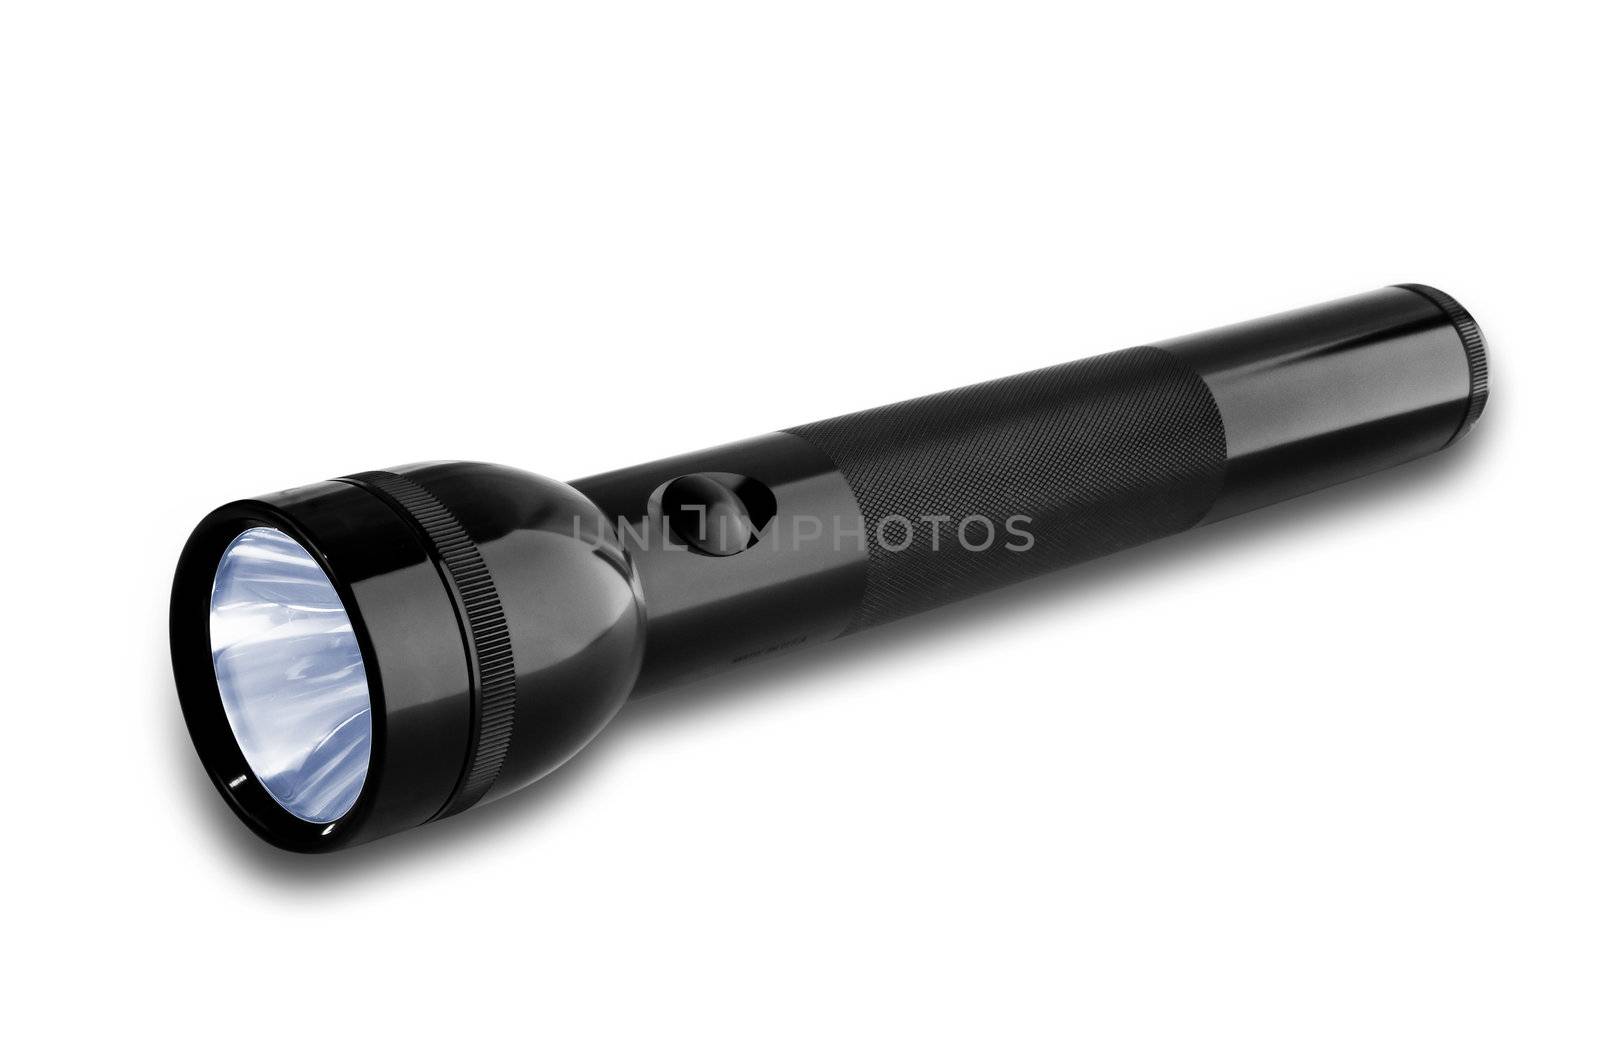 large d cell black flashlight with shadow and clipping path